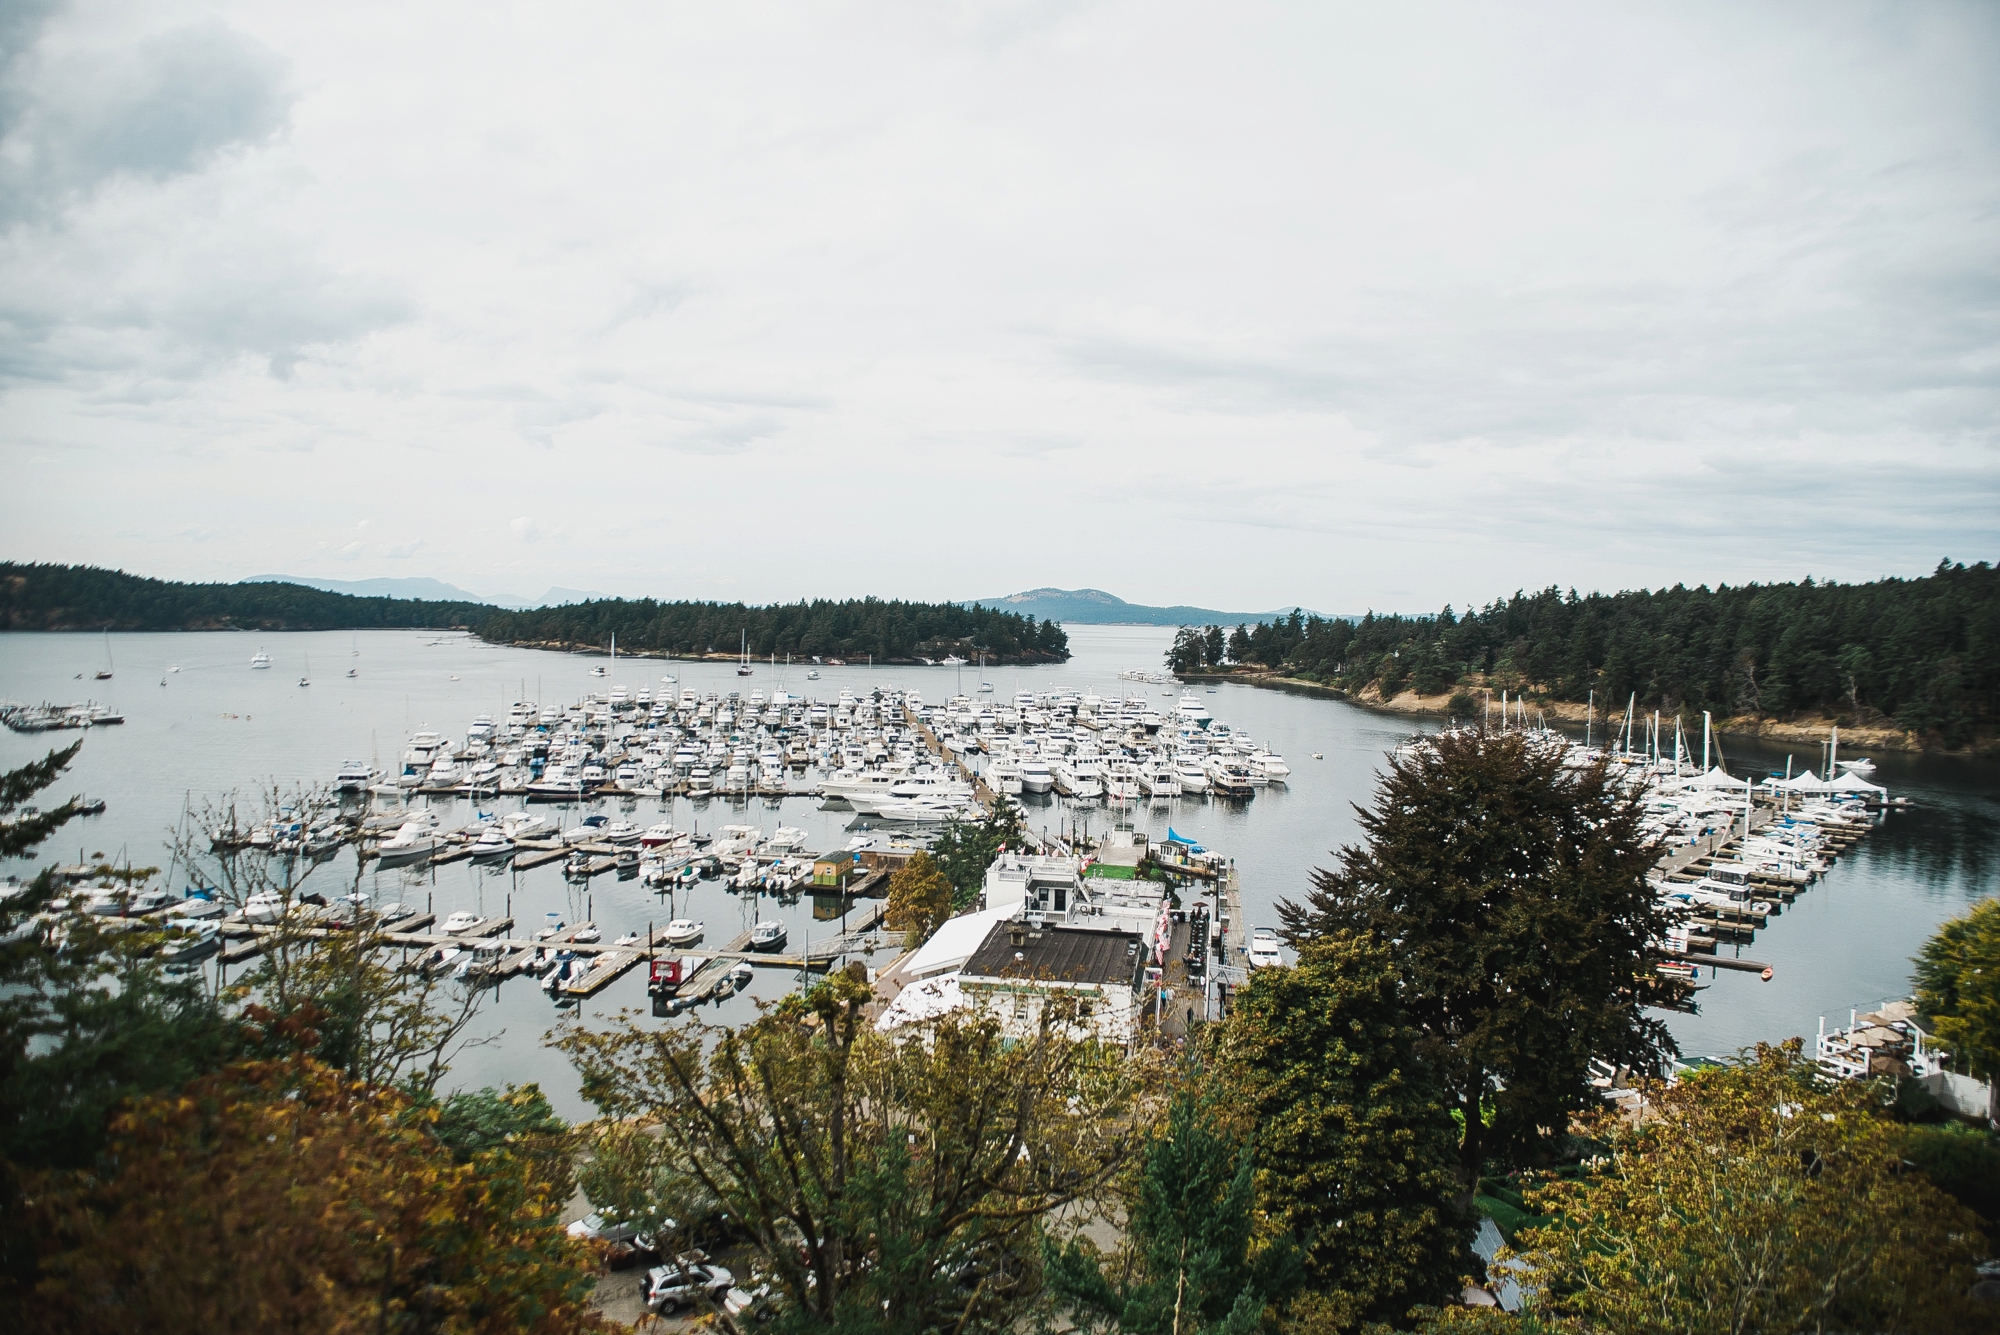 Roche Harbor Resort from above